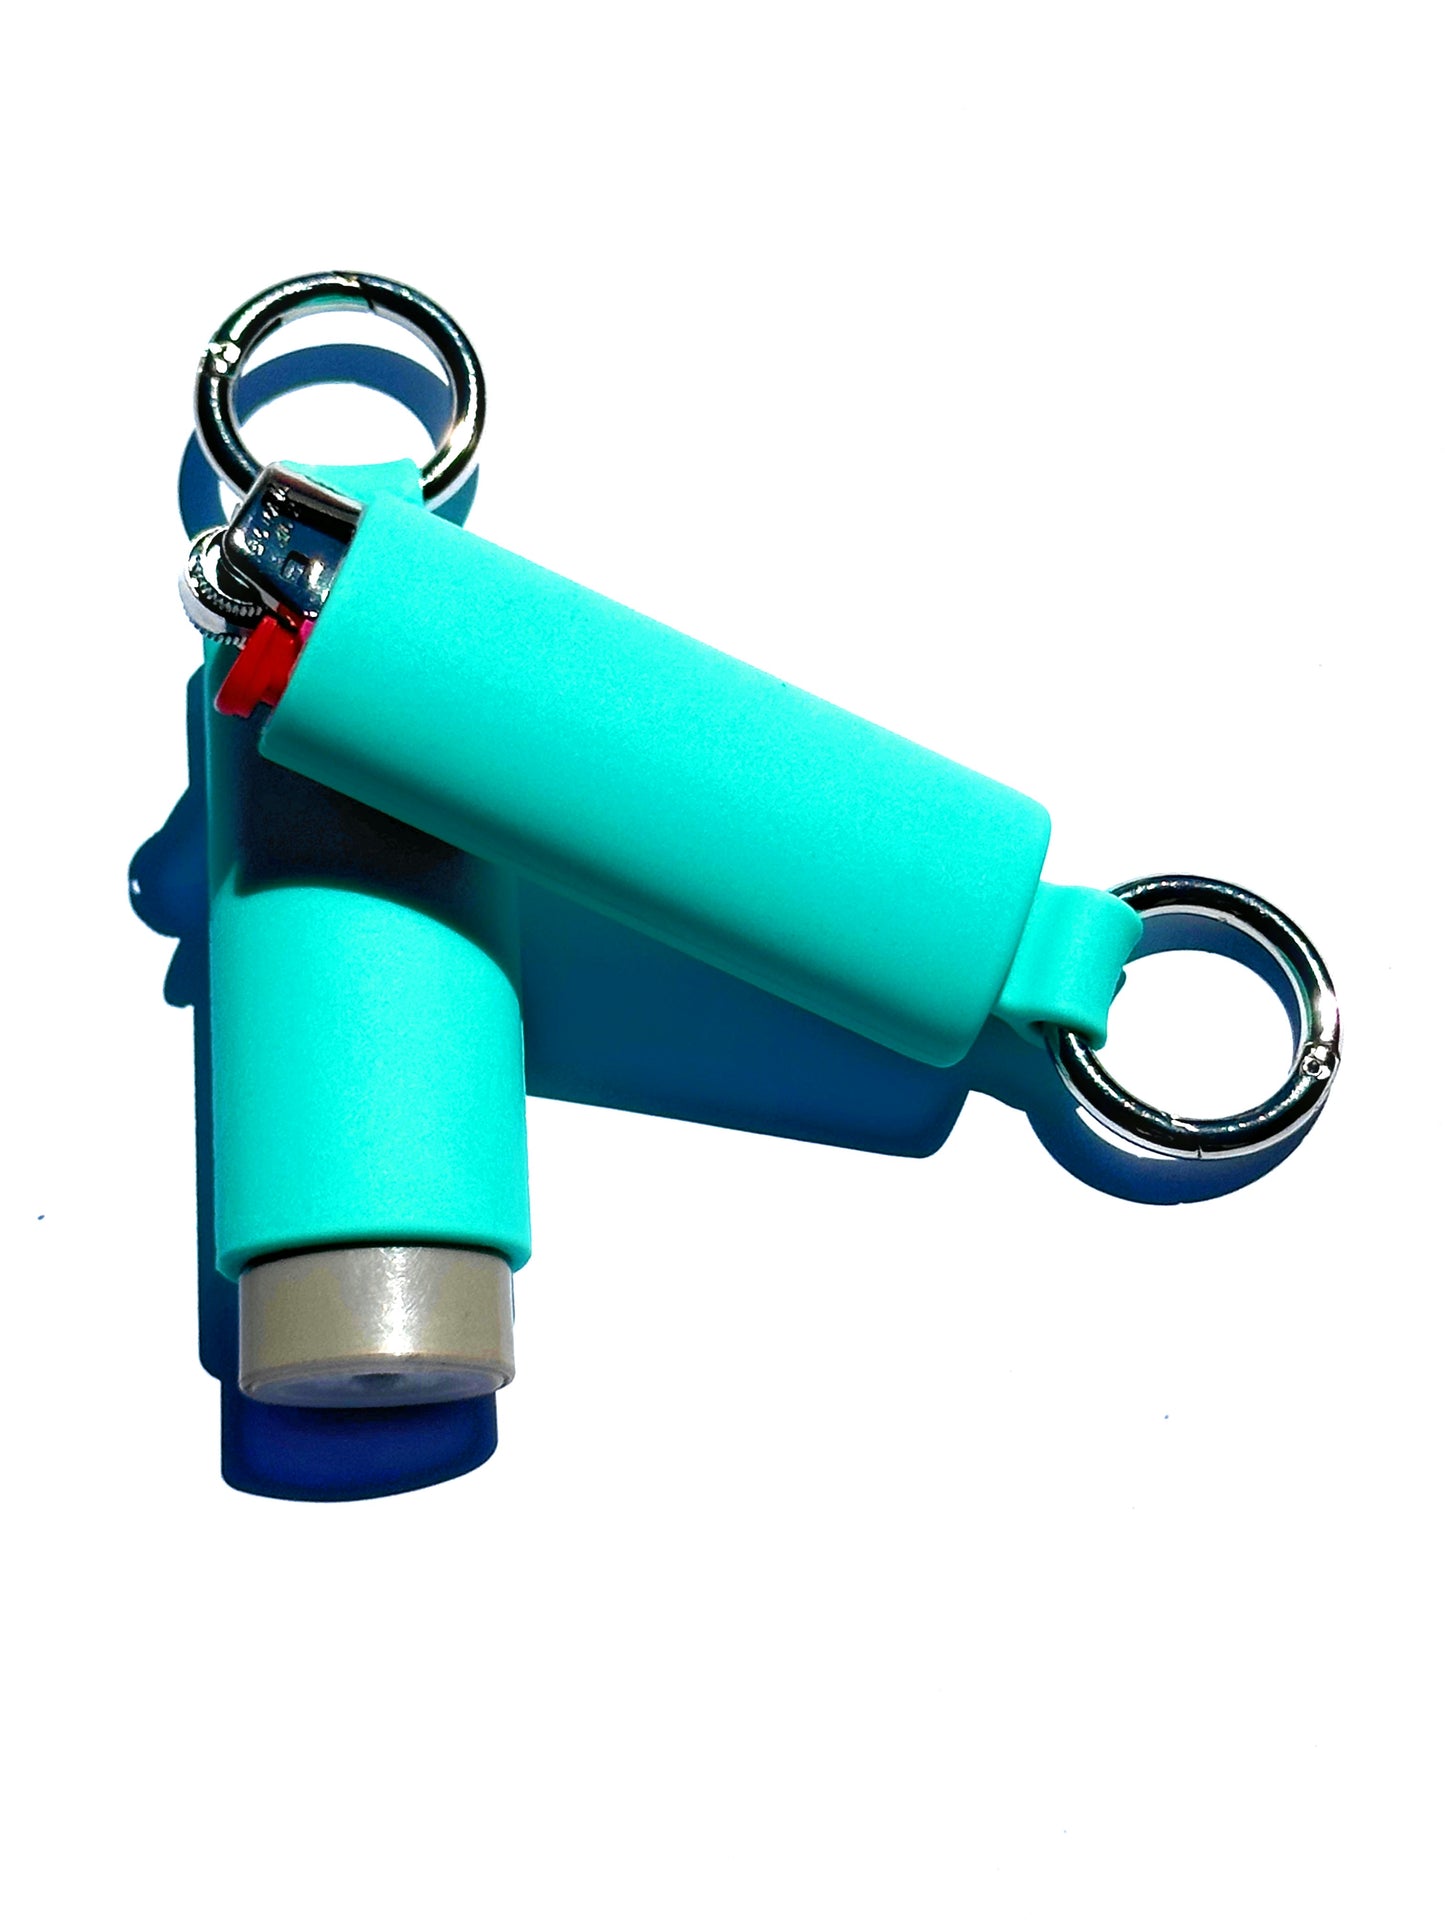 Lighter Holder Keychain with Spring Clip made by Lighter Locators